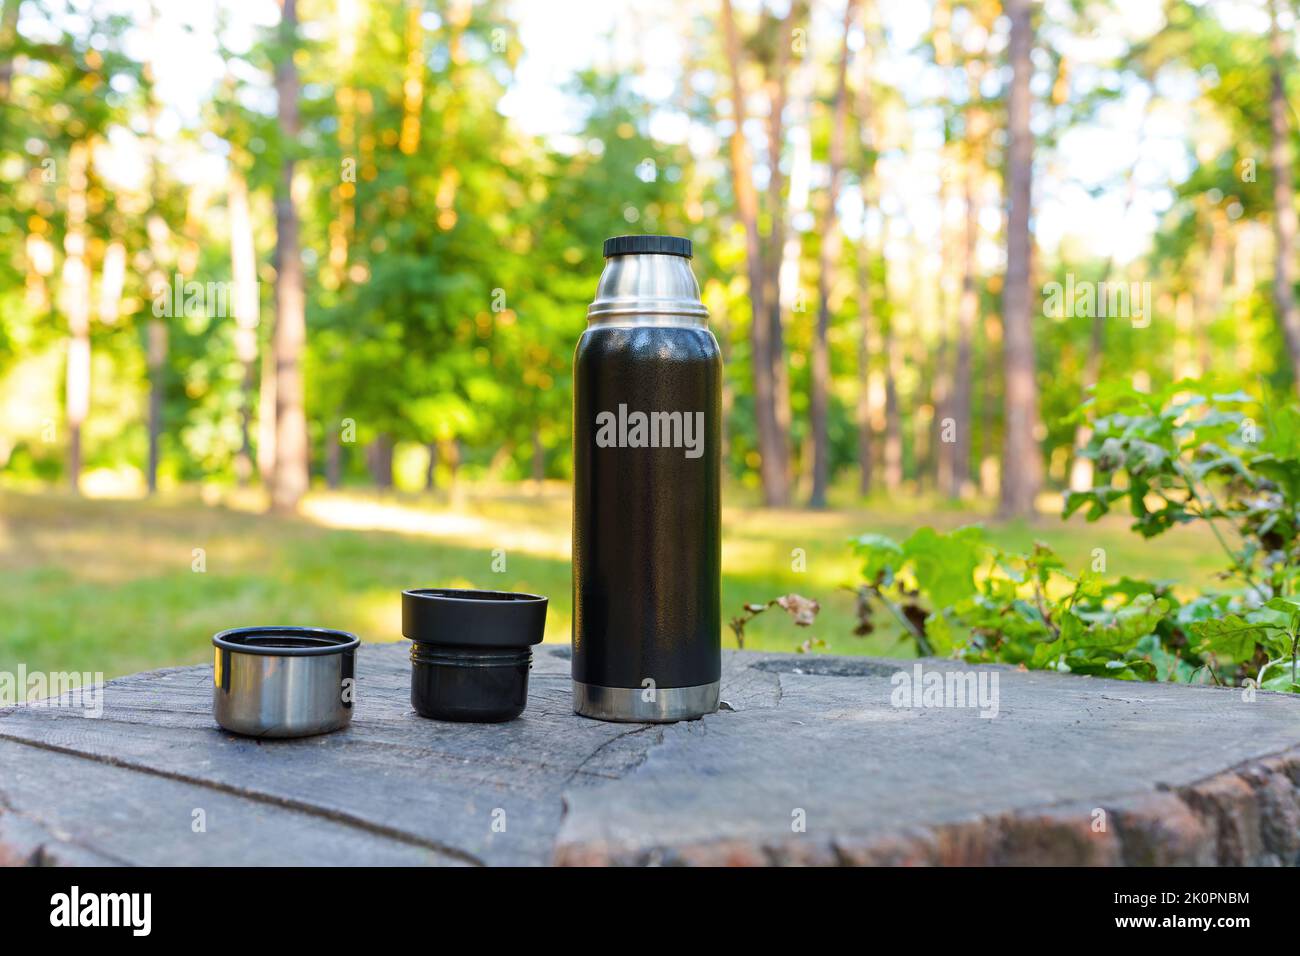 Black thermos flask and cups placed on a large tree stump in the forest. Stock Photo